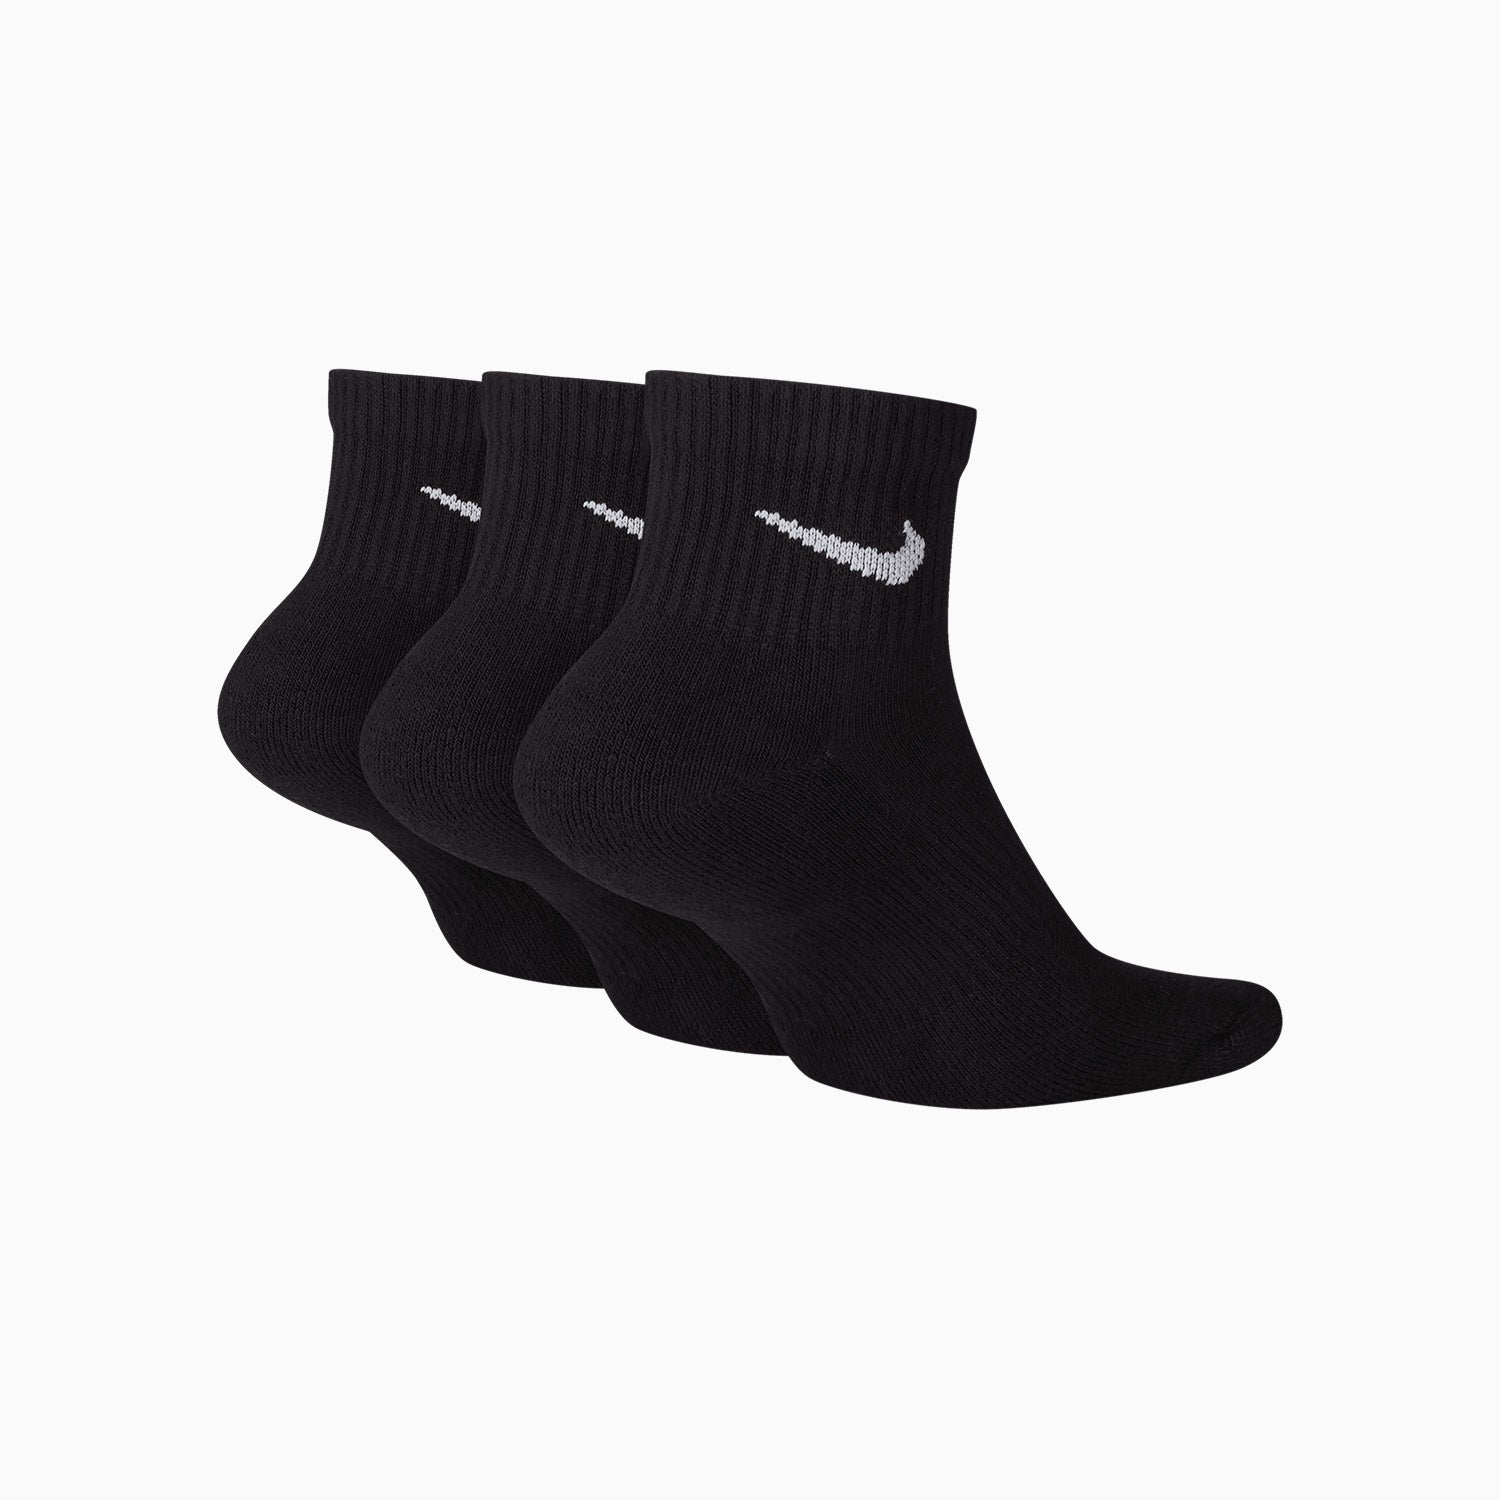 mens-nike-everyday-plus-cushioned-ankle-socks-3-pairs-sx6890-010